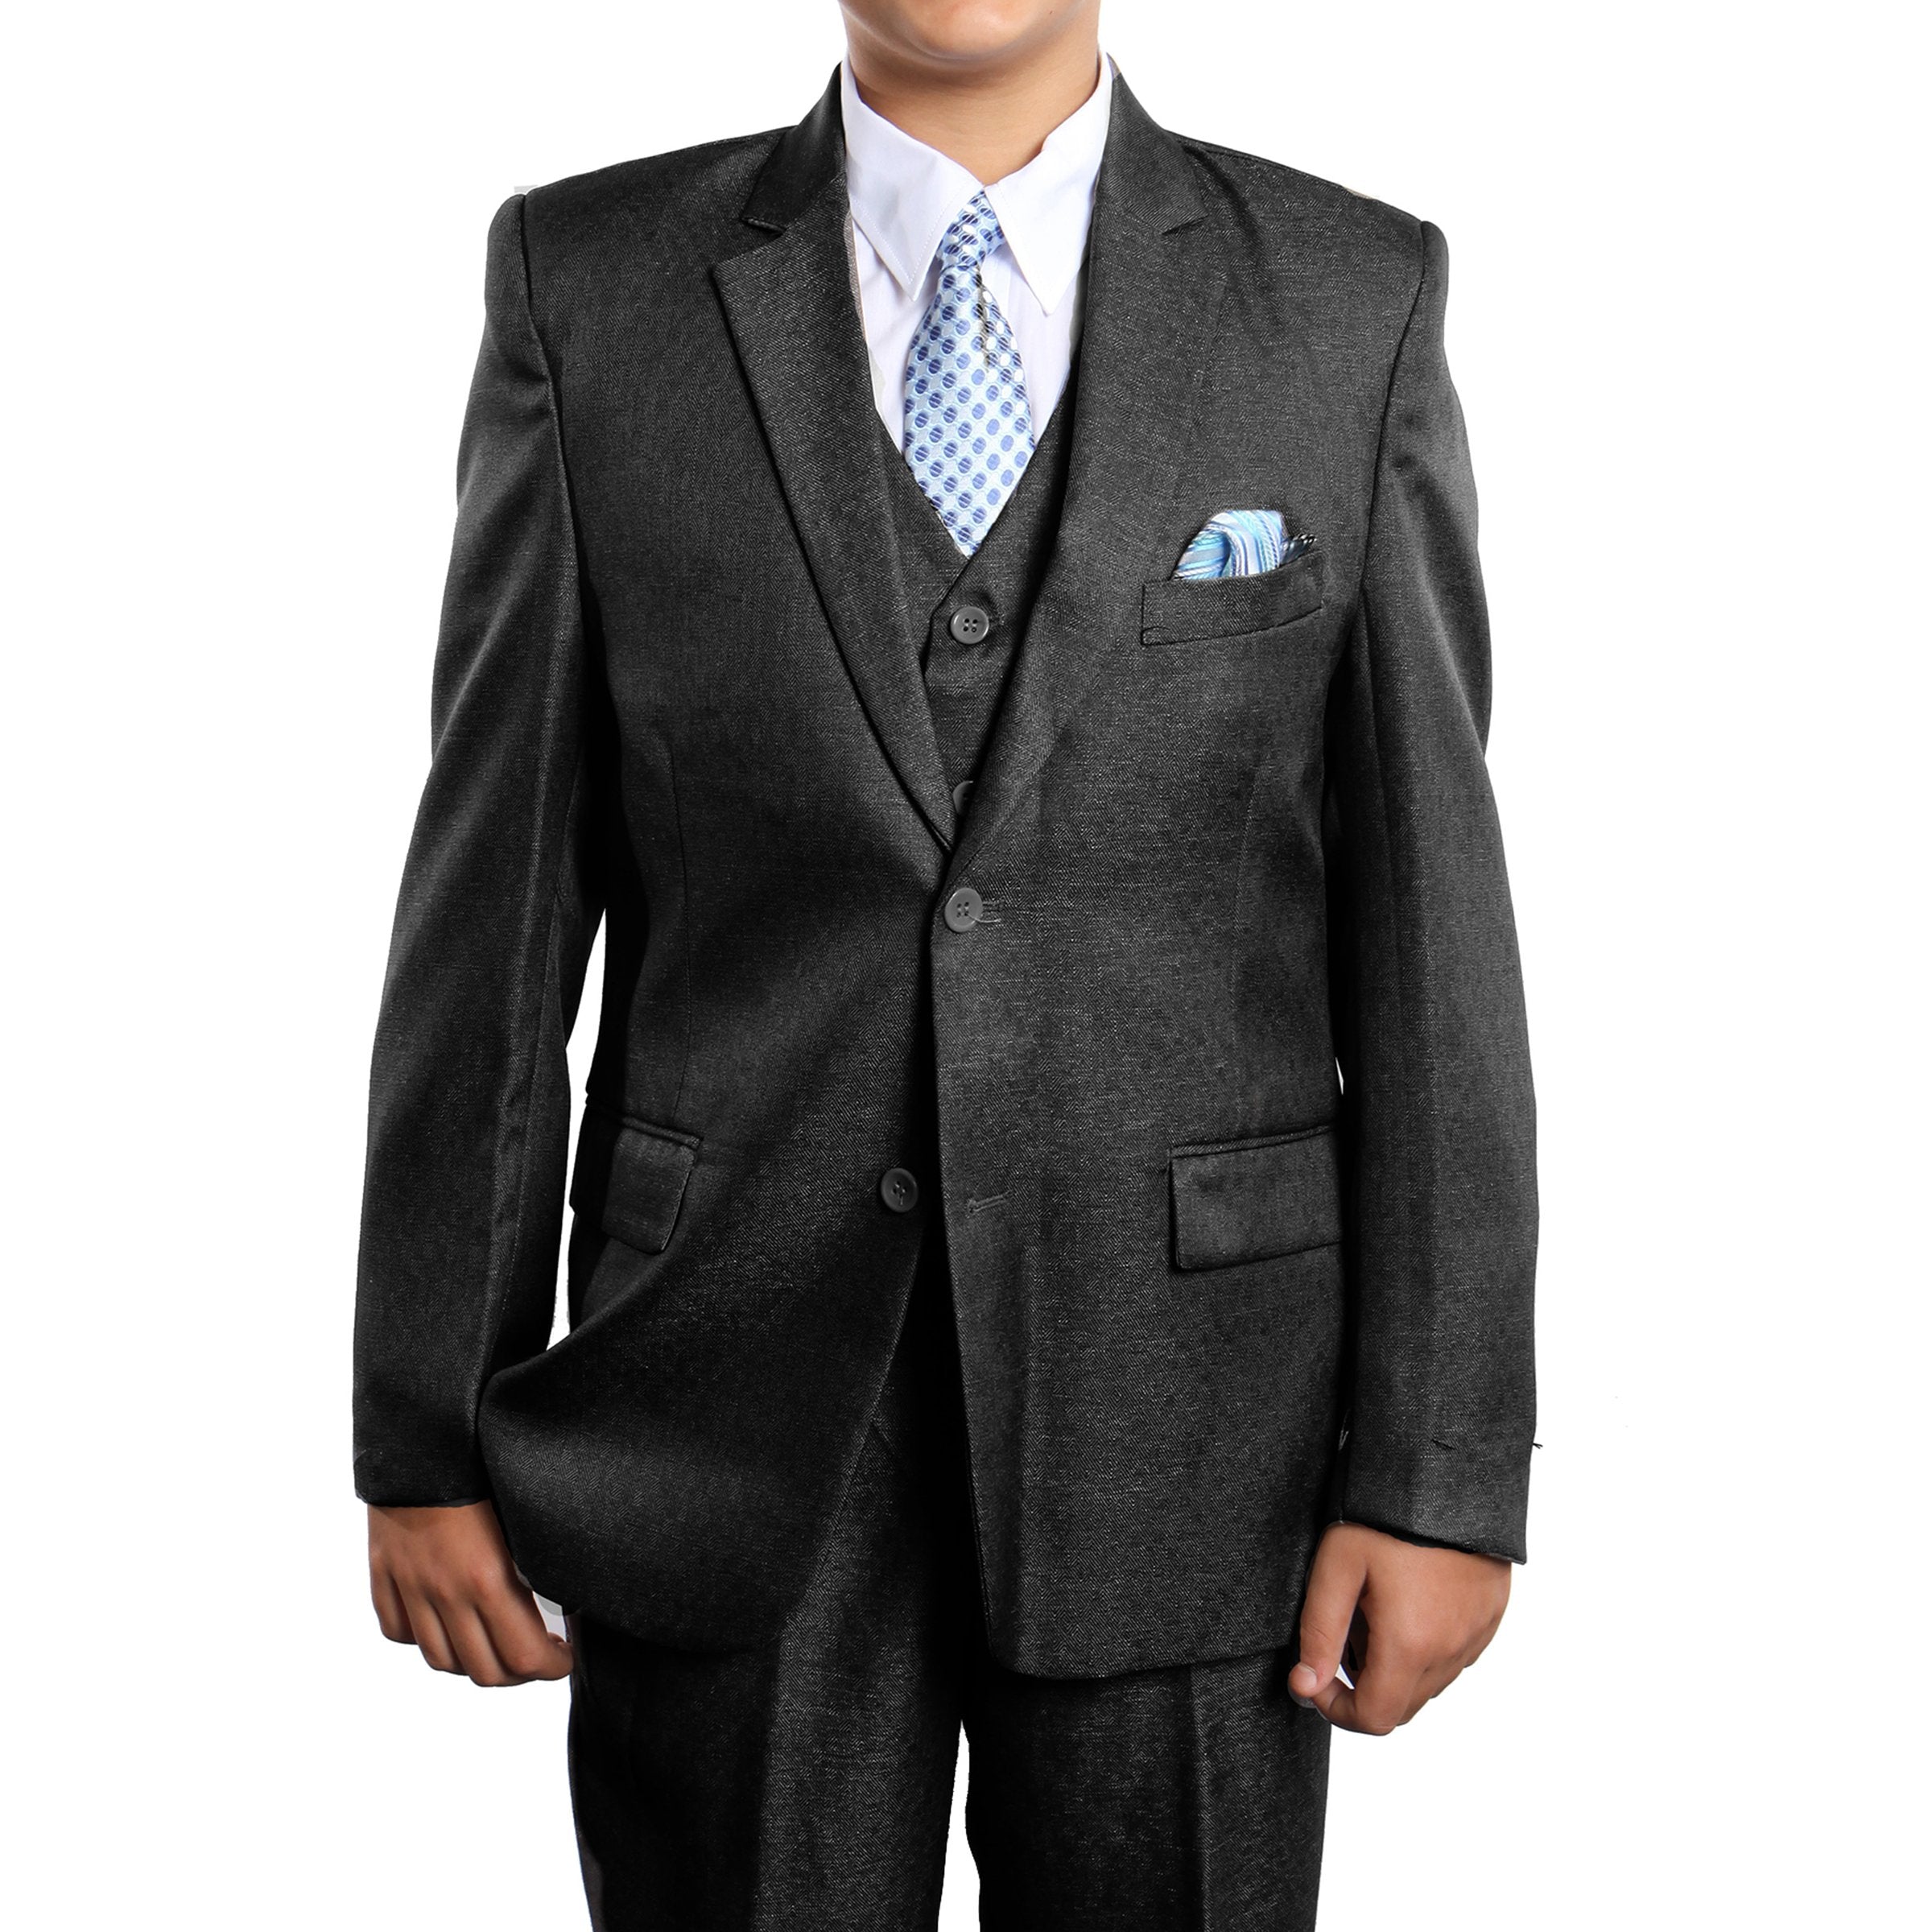 5 PC Boy's Solid Suit with Shirt & Tie Suits For Boy's